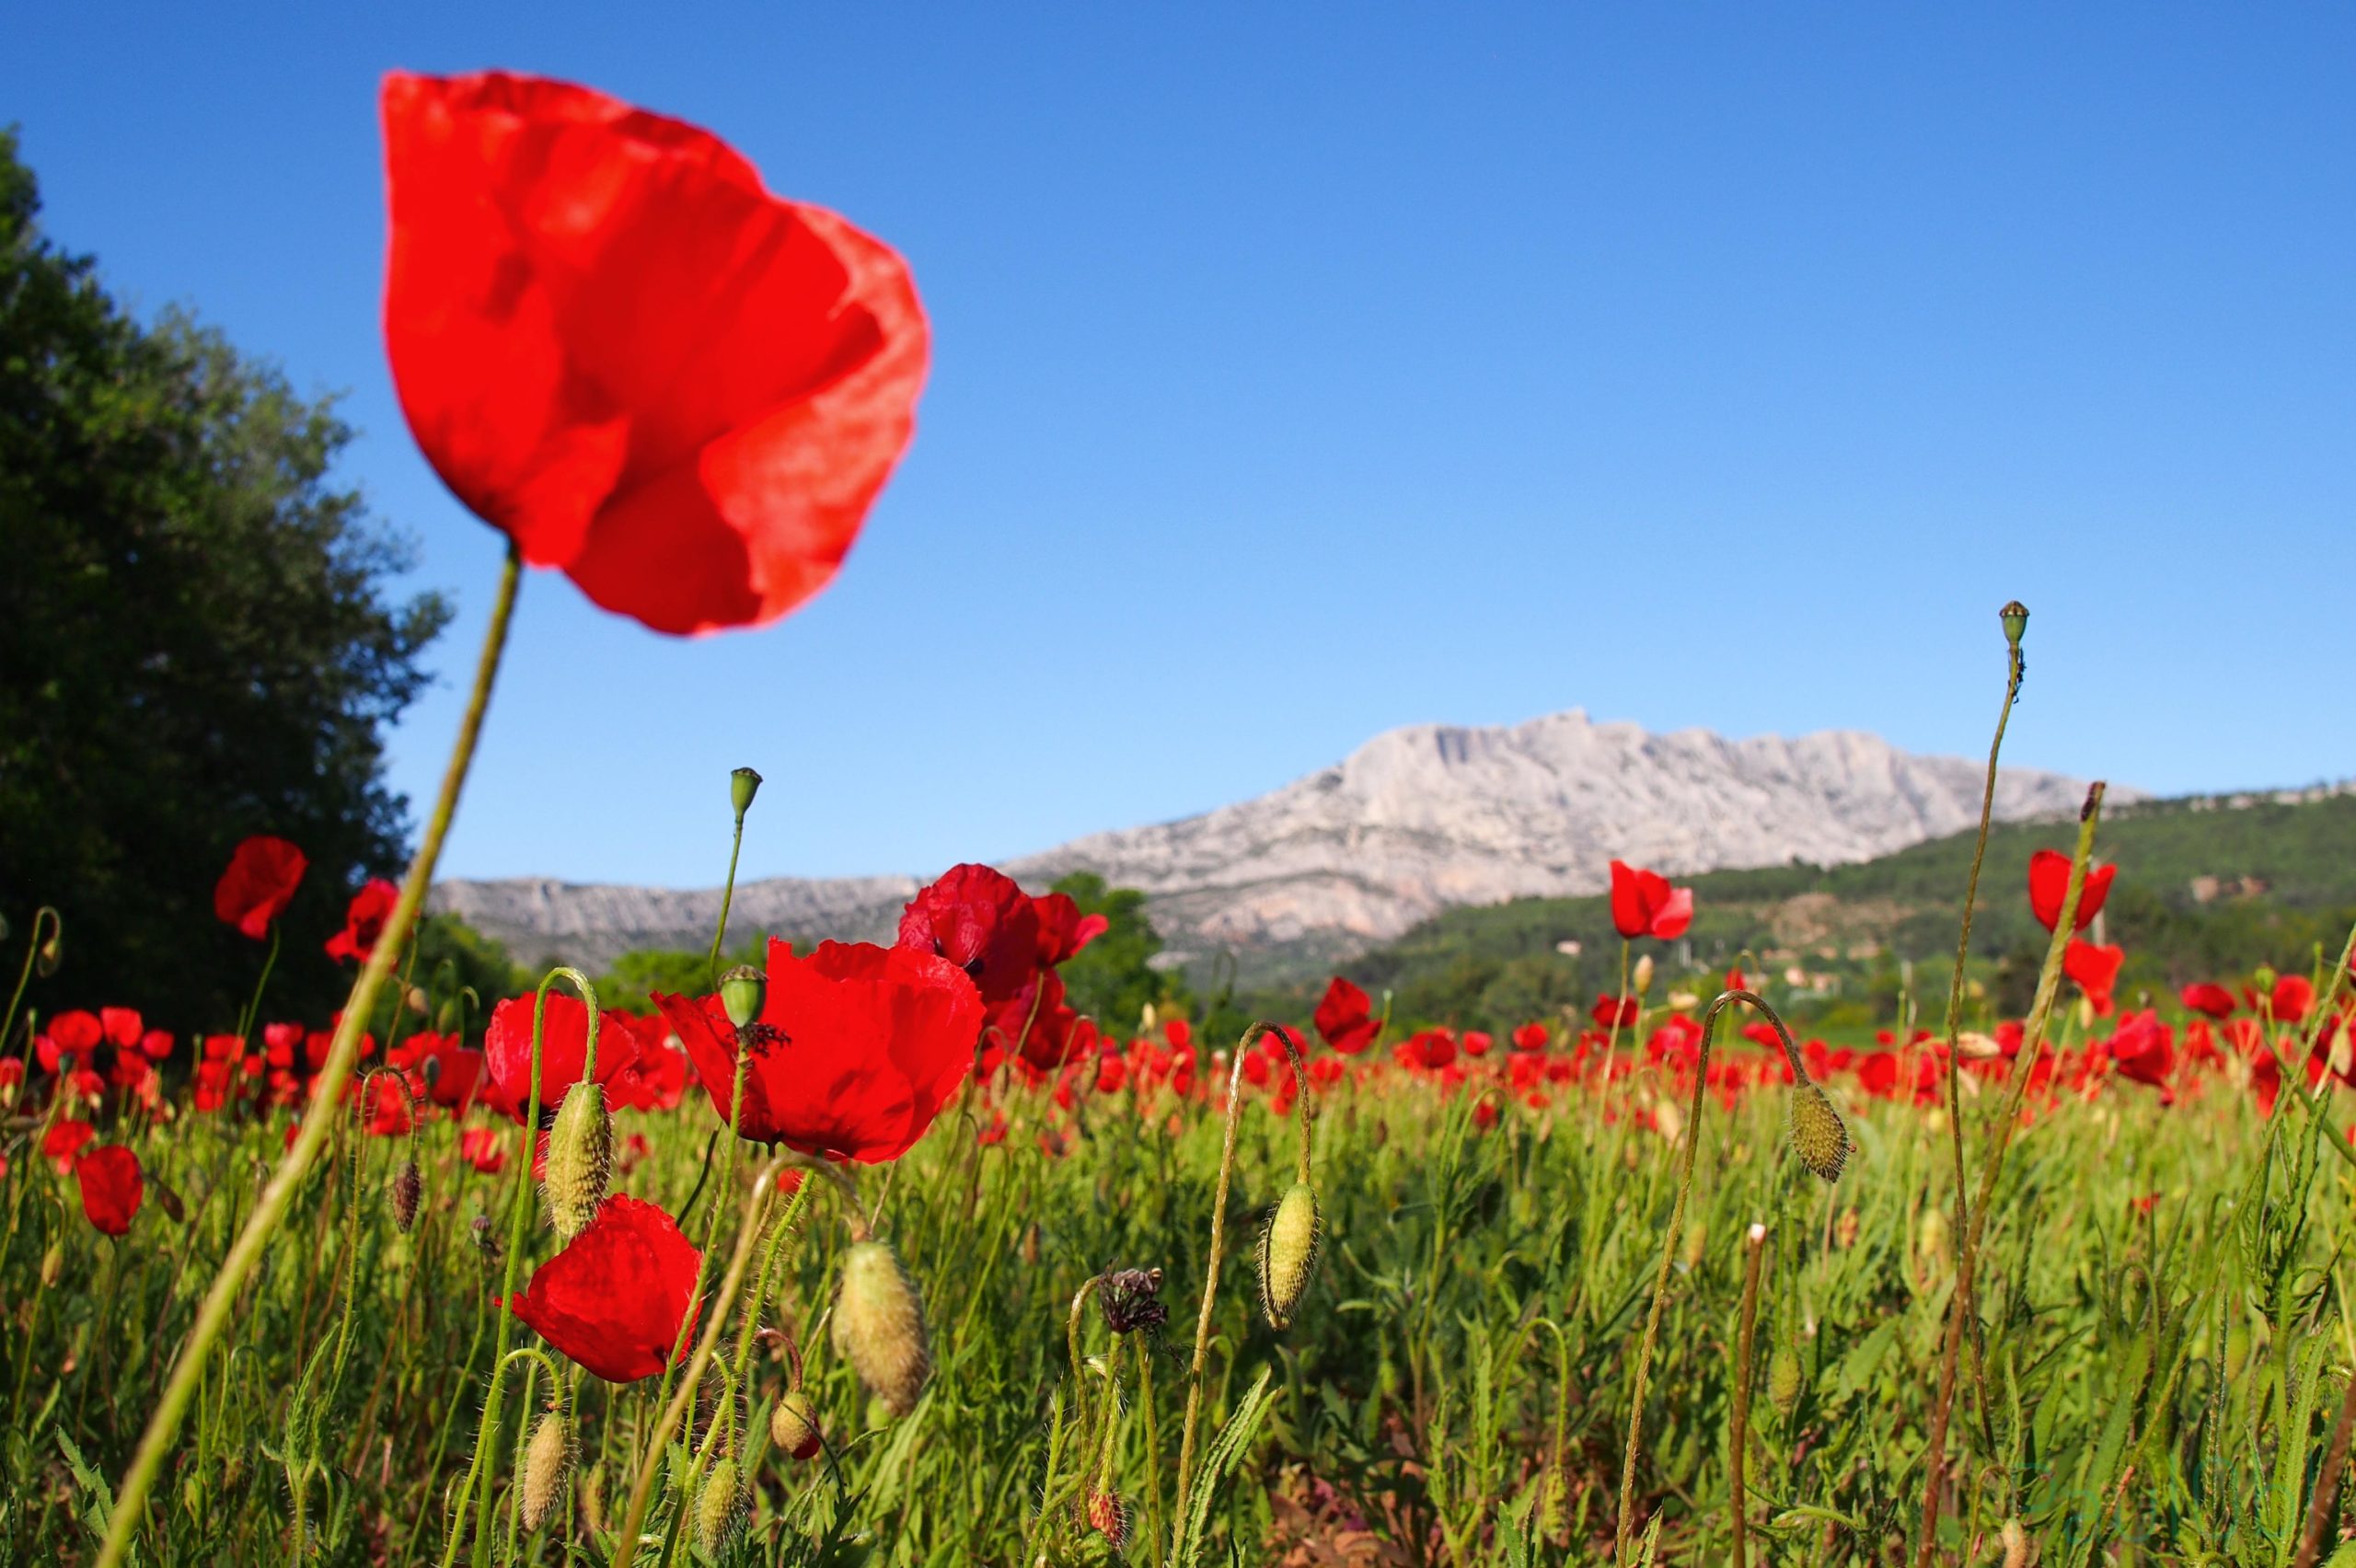 Coquelicot et Montagne Sainte-Victoire © Paul Oublon - licence [CC BY-SA 4.0] from Wikimedia Commons